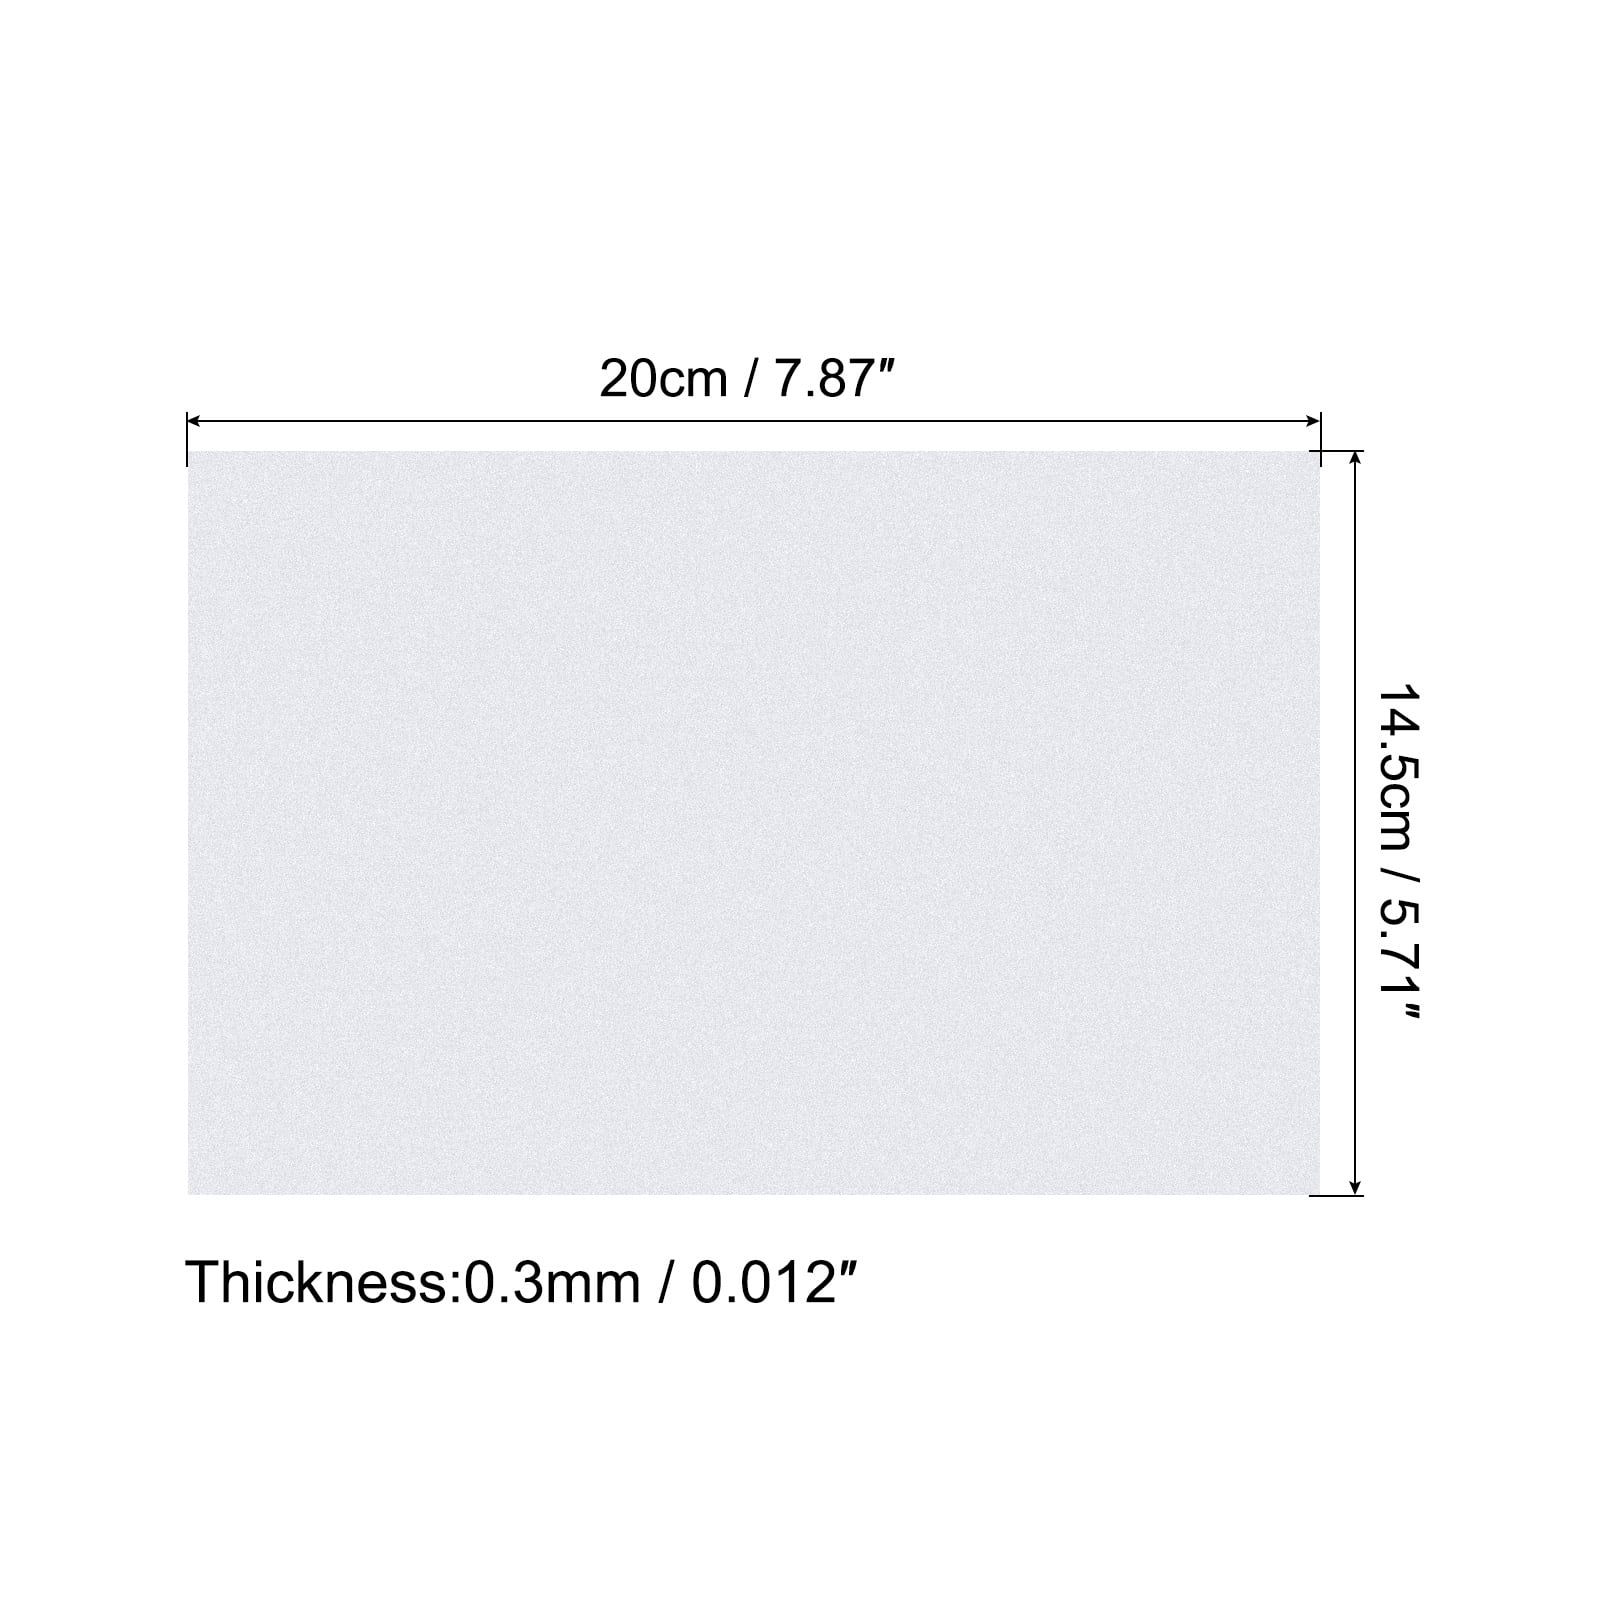 Sizzix Shrink Plastic 10PK (A4 Sheets) Surfacez-10PK , Frosted White, 10  Pack, 20.999999999999996 x 7.3 x 1 cm, Die Cut, 20.999999999999996 x 7.3 x  1